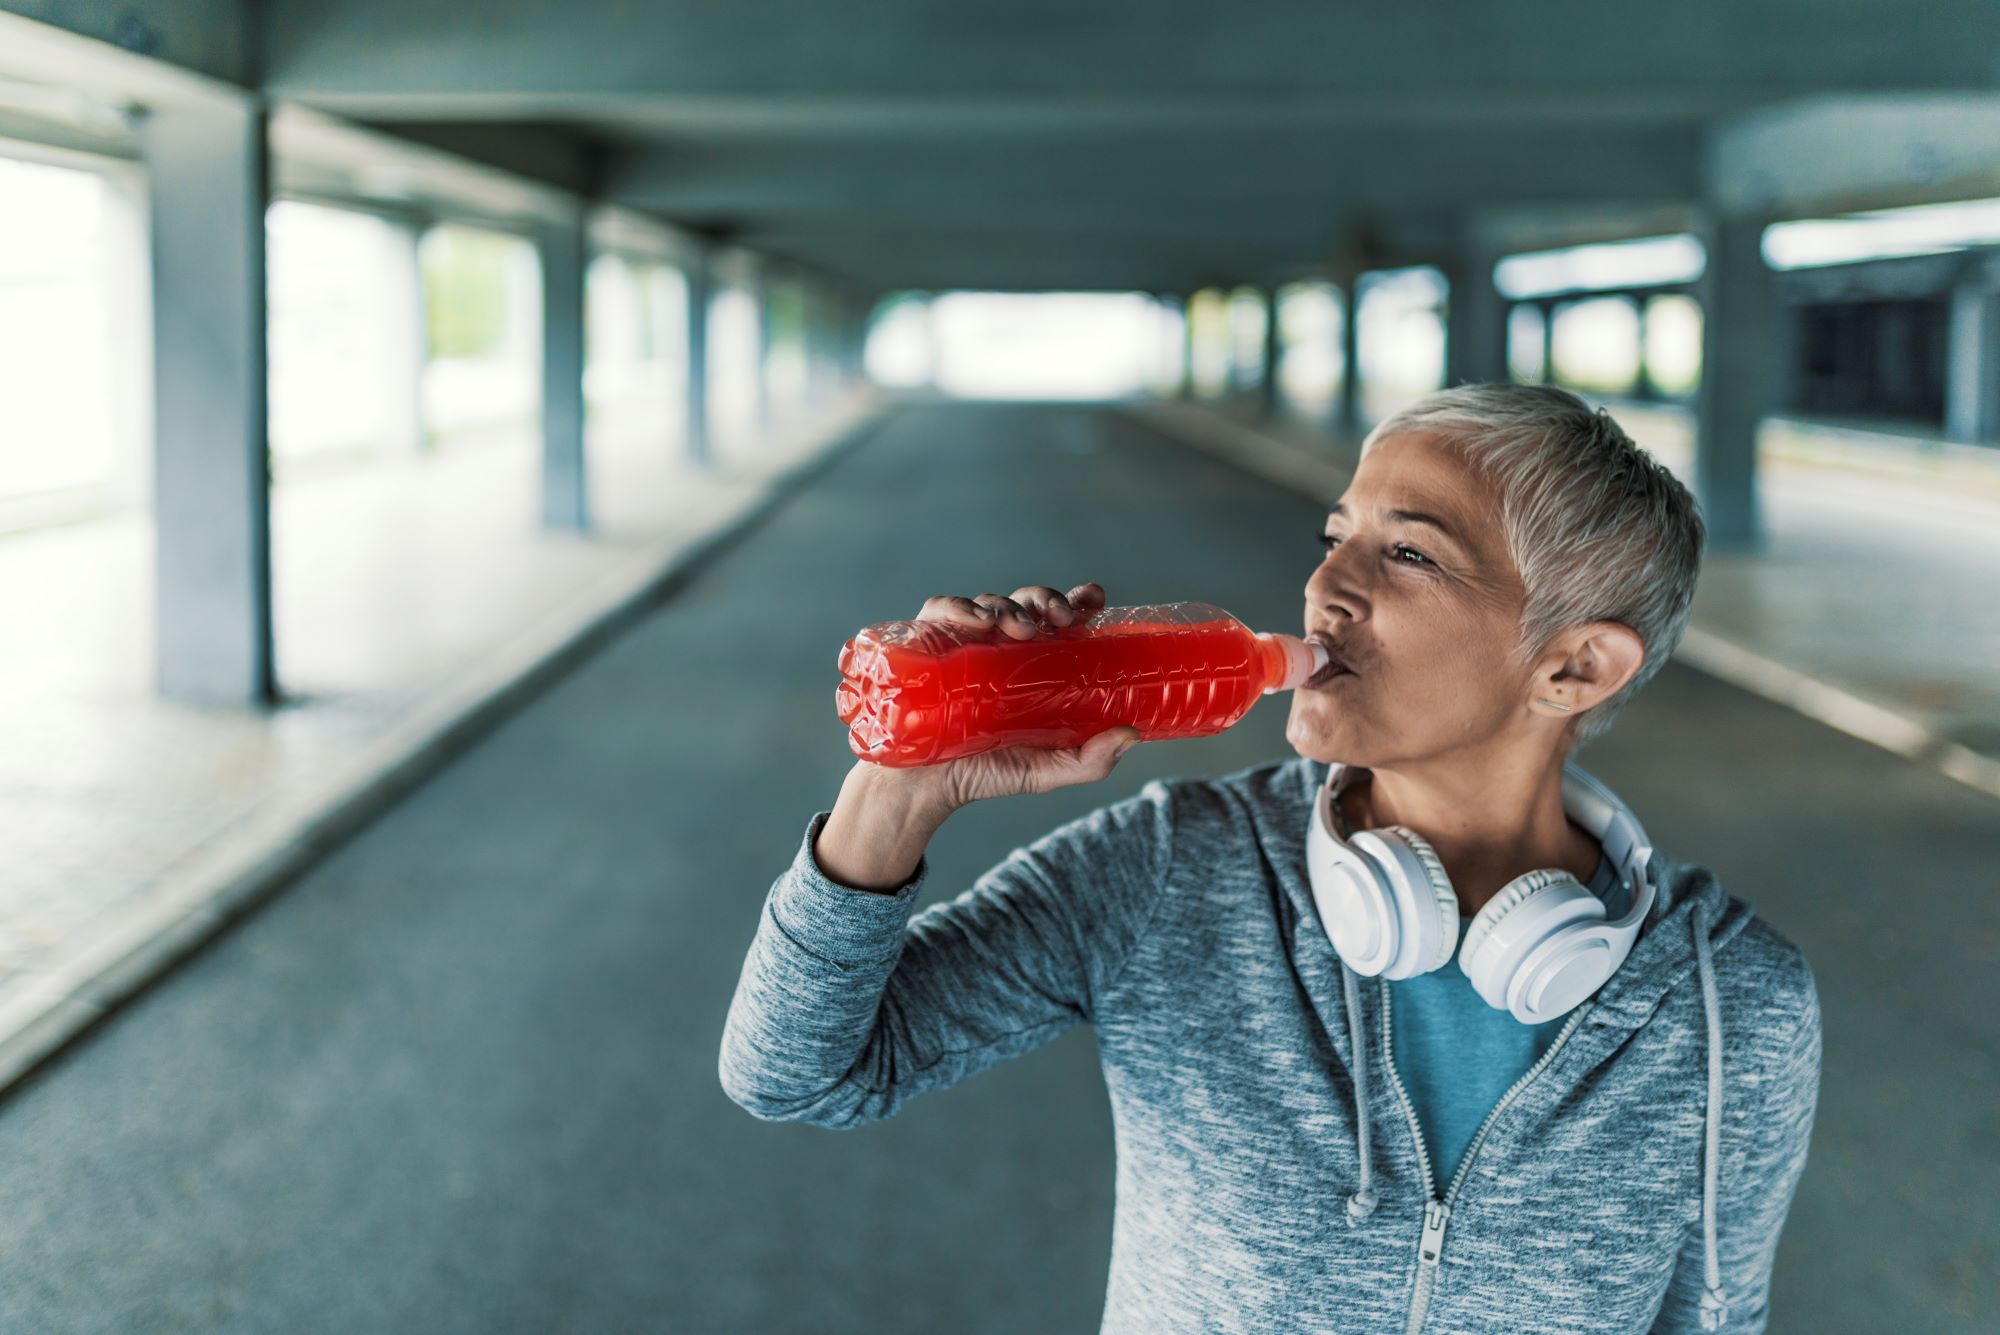 Woman enjoys a post-workout recovery beverage